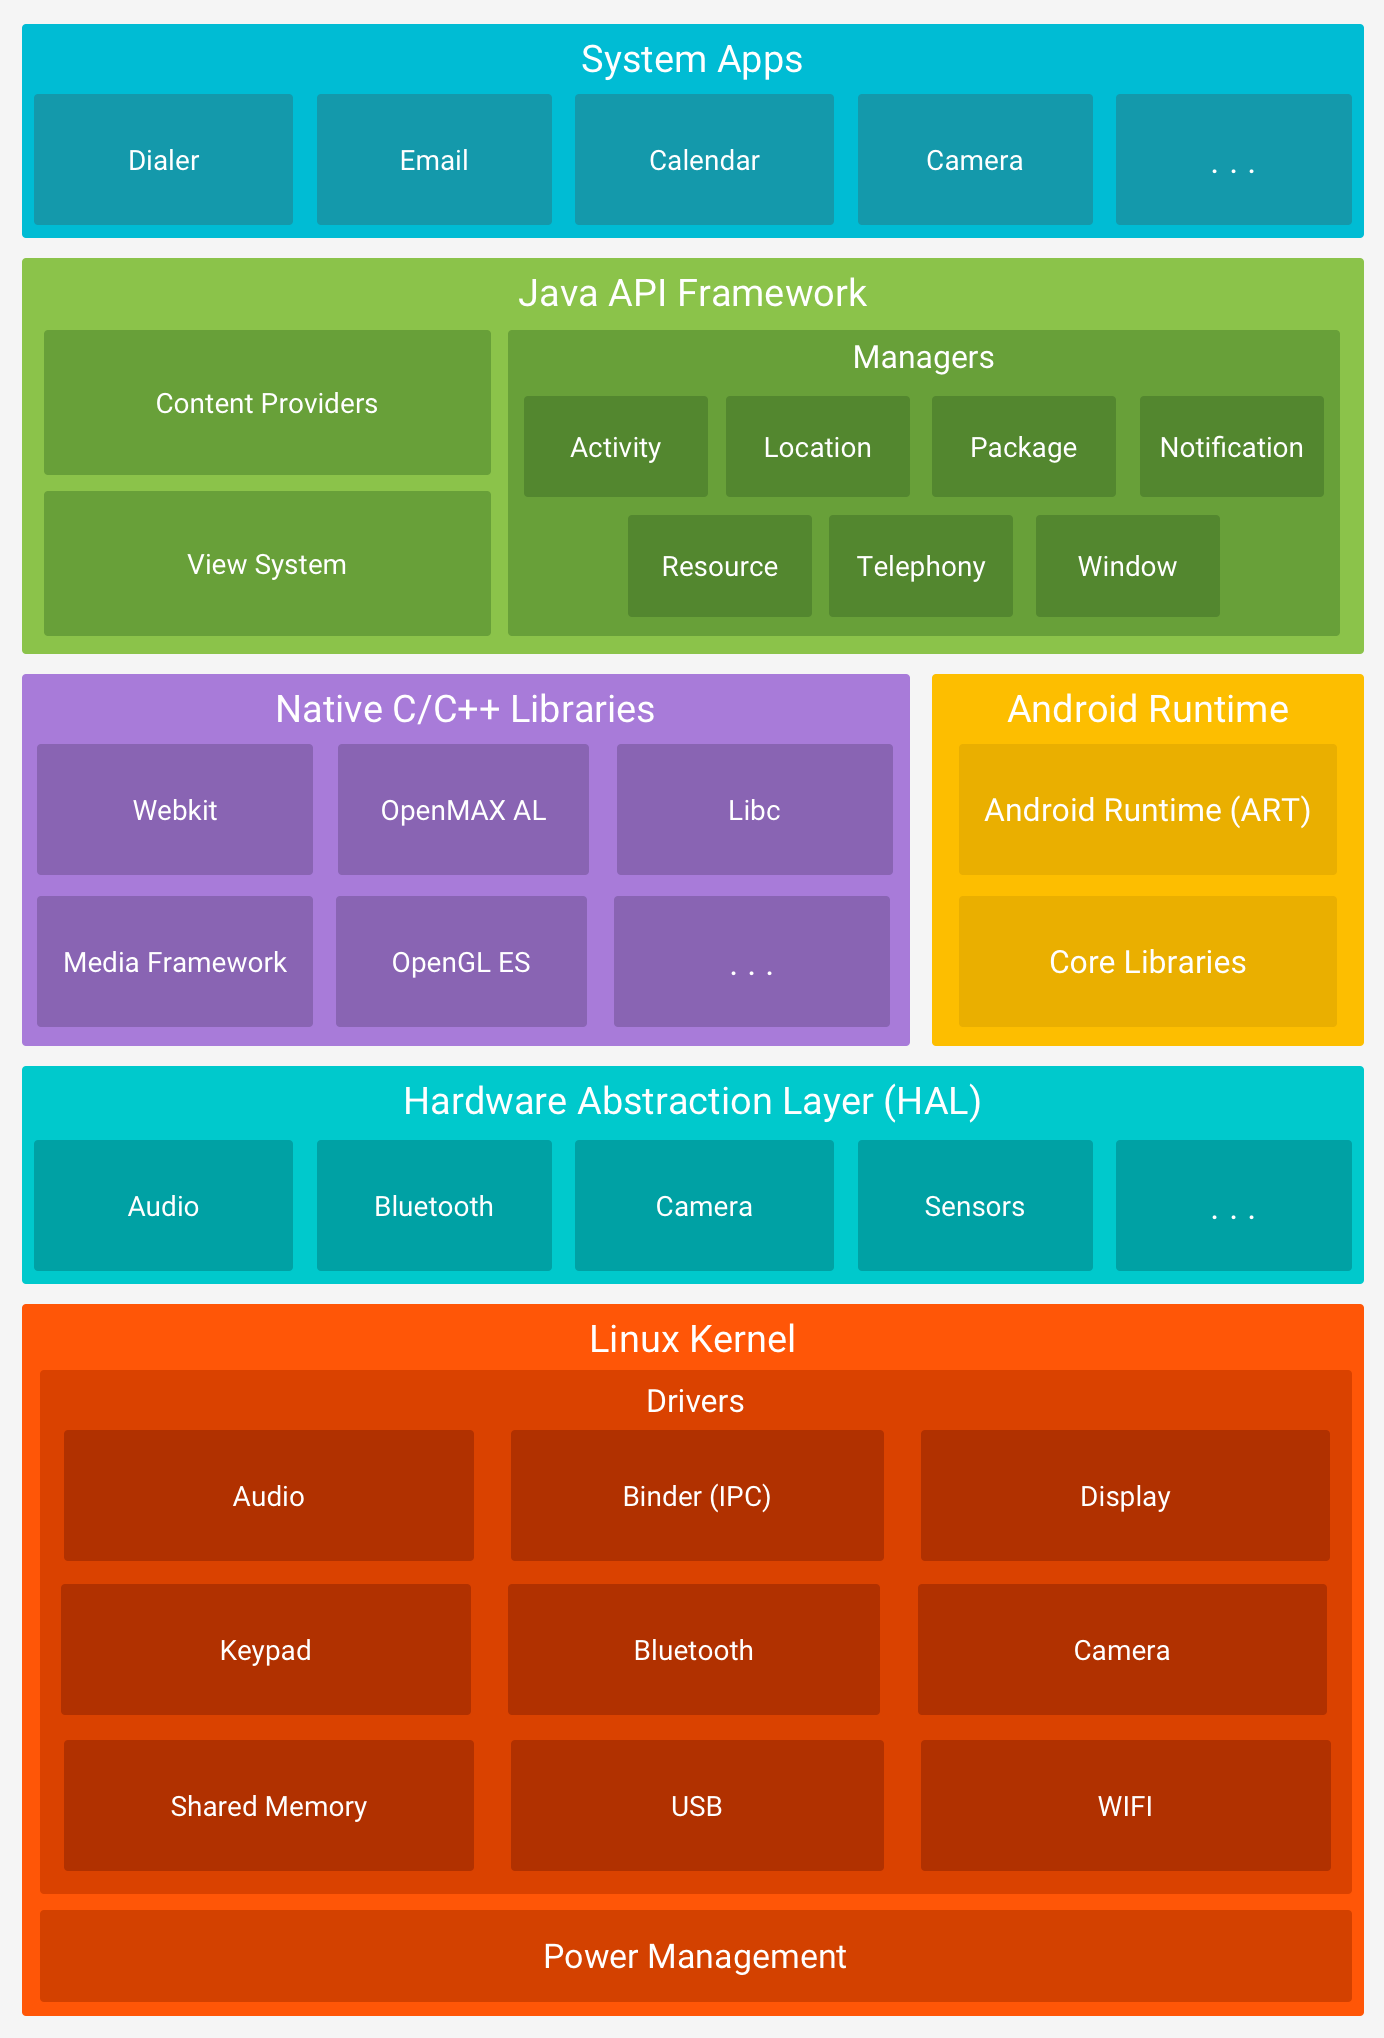 The Android software stack